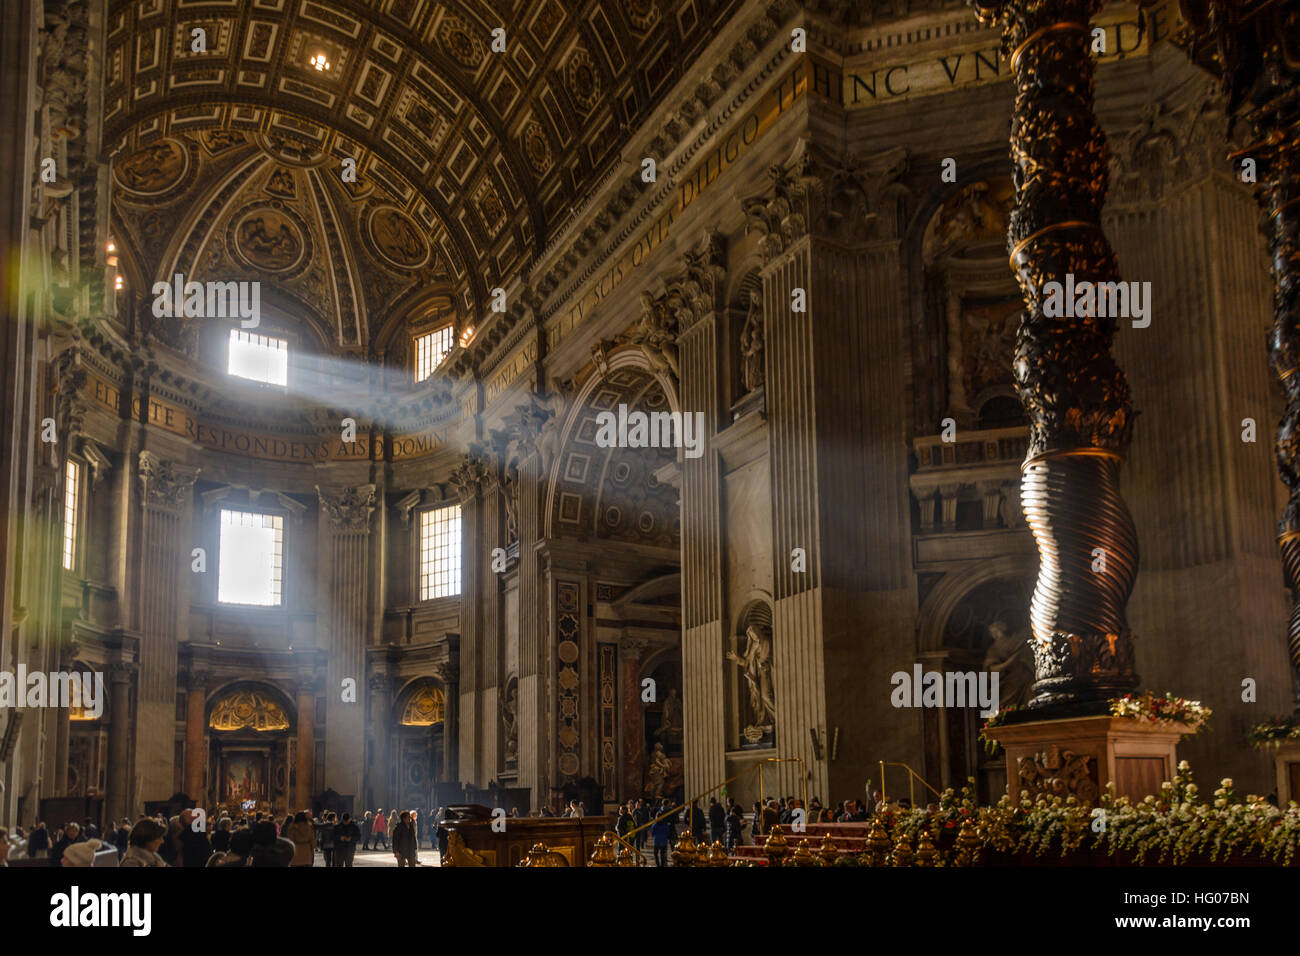 Sunbeams shining through a window into St. Peter's Basilica in Vatican city, Rome. Stock Photo